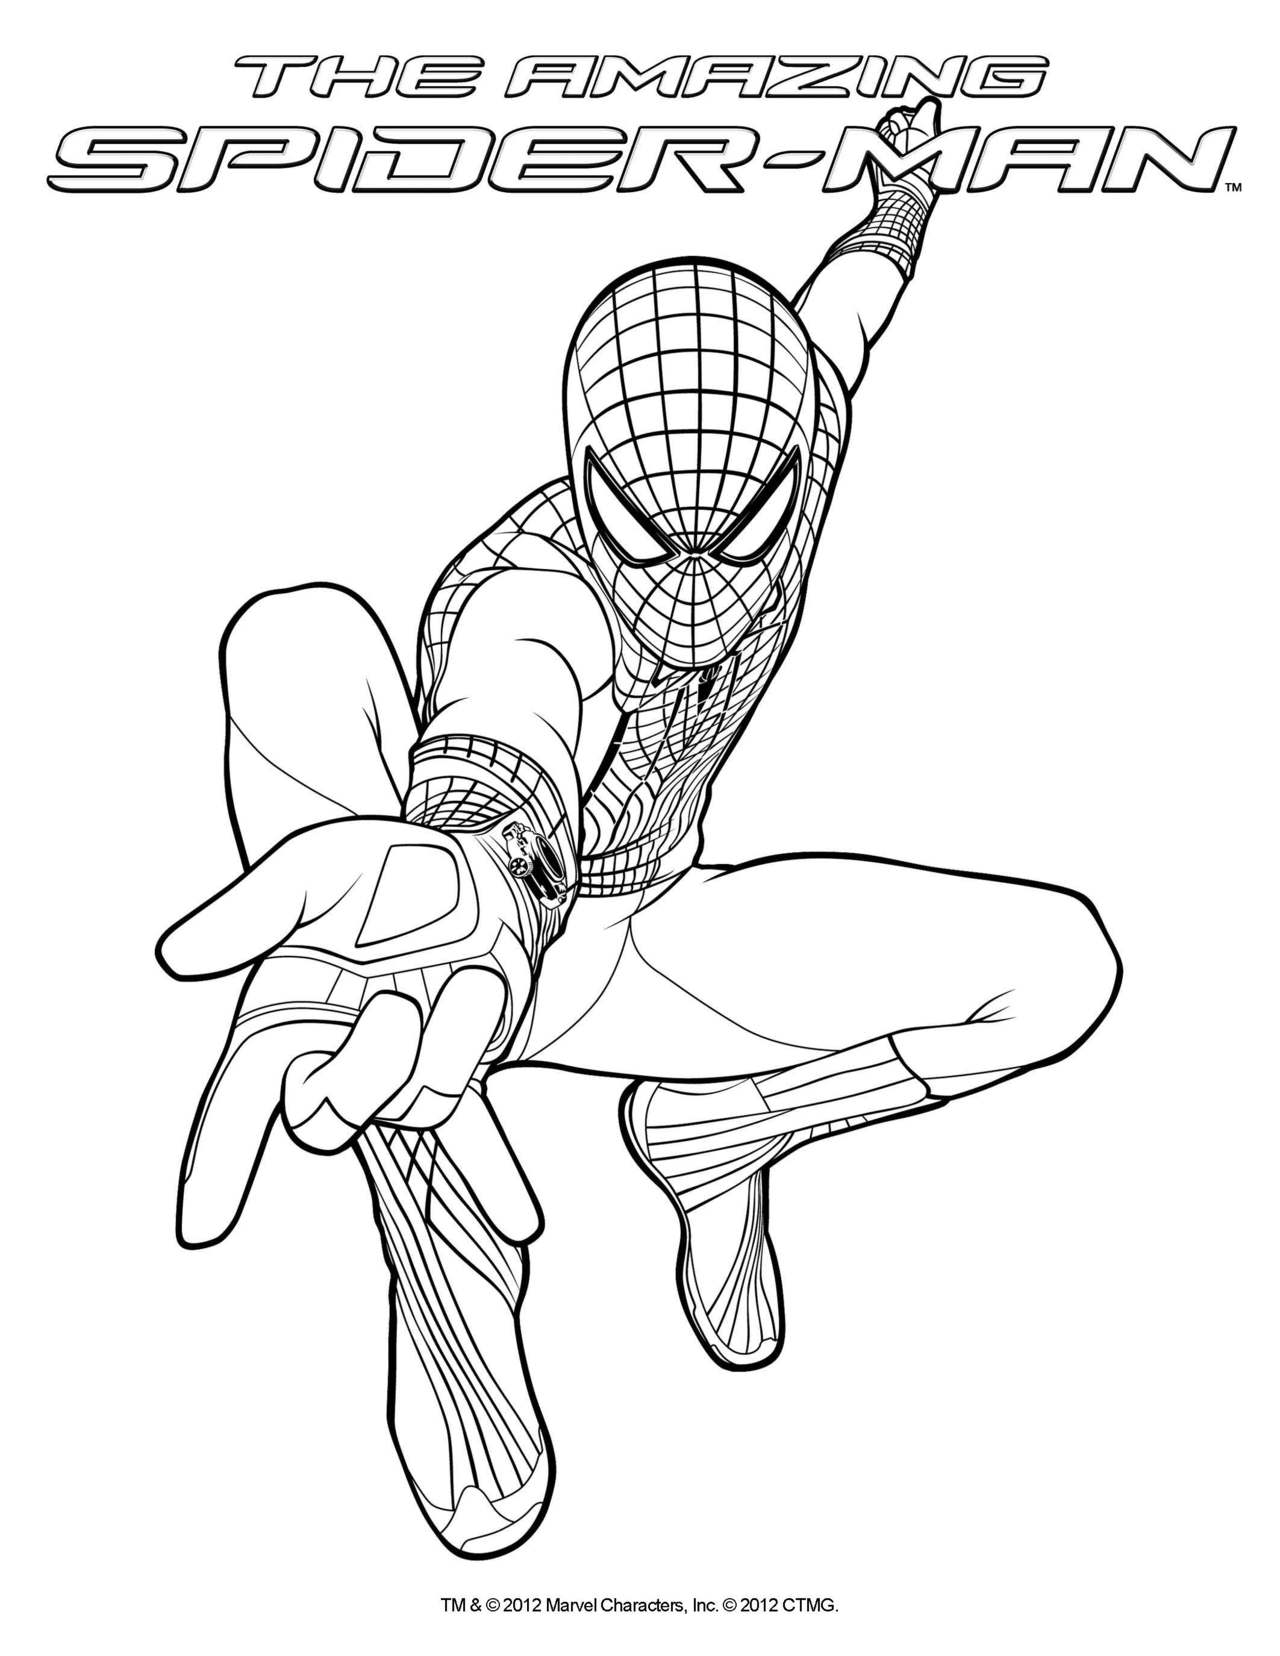 Amazing Spiderman Coloring Pages For Adults - Coloring Pages For ...